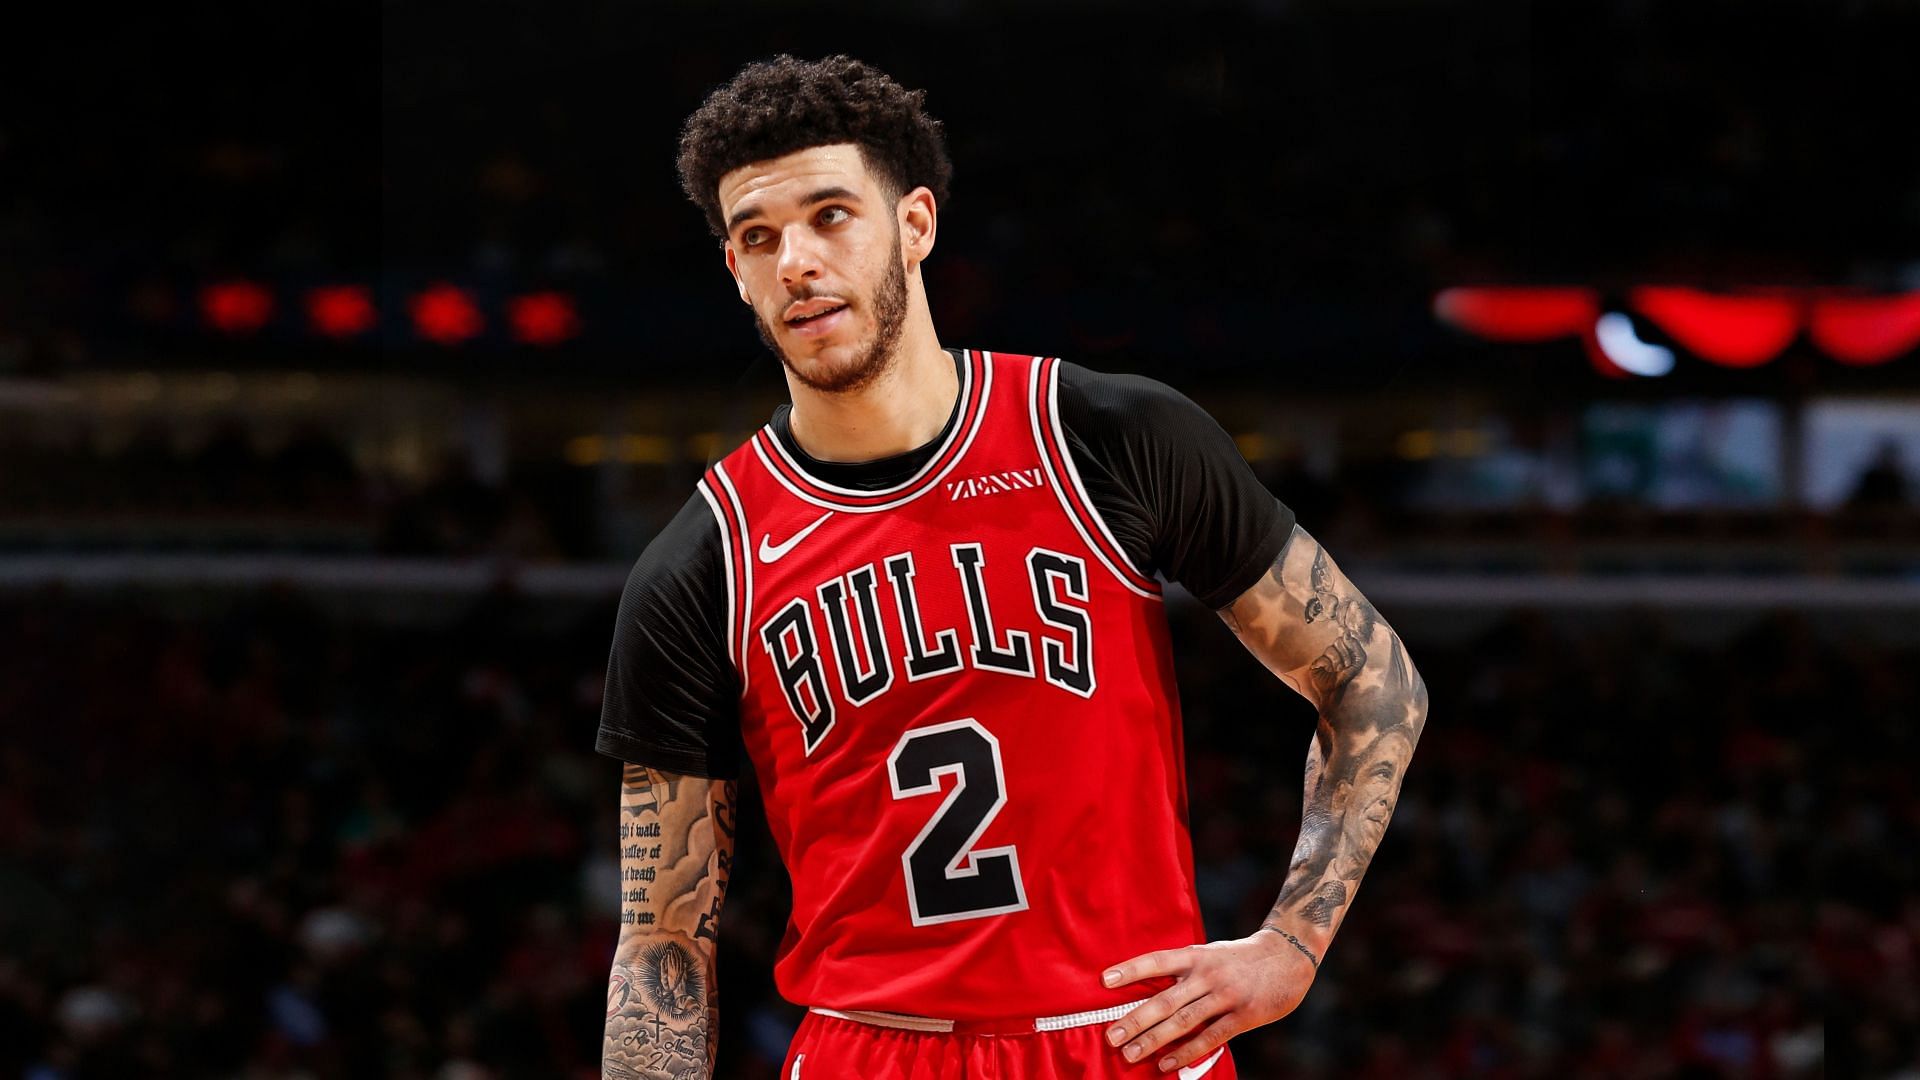 Chicago Bulls guard Lonzo Ball has been impressive to start the year